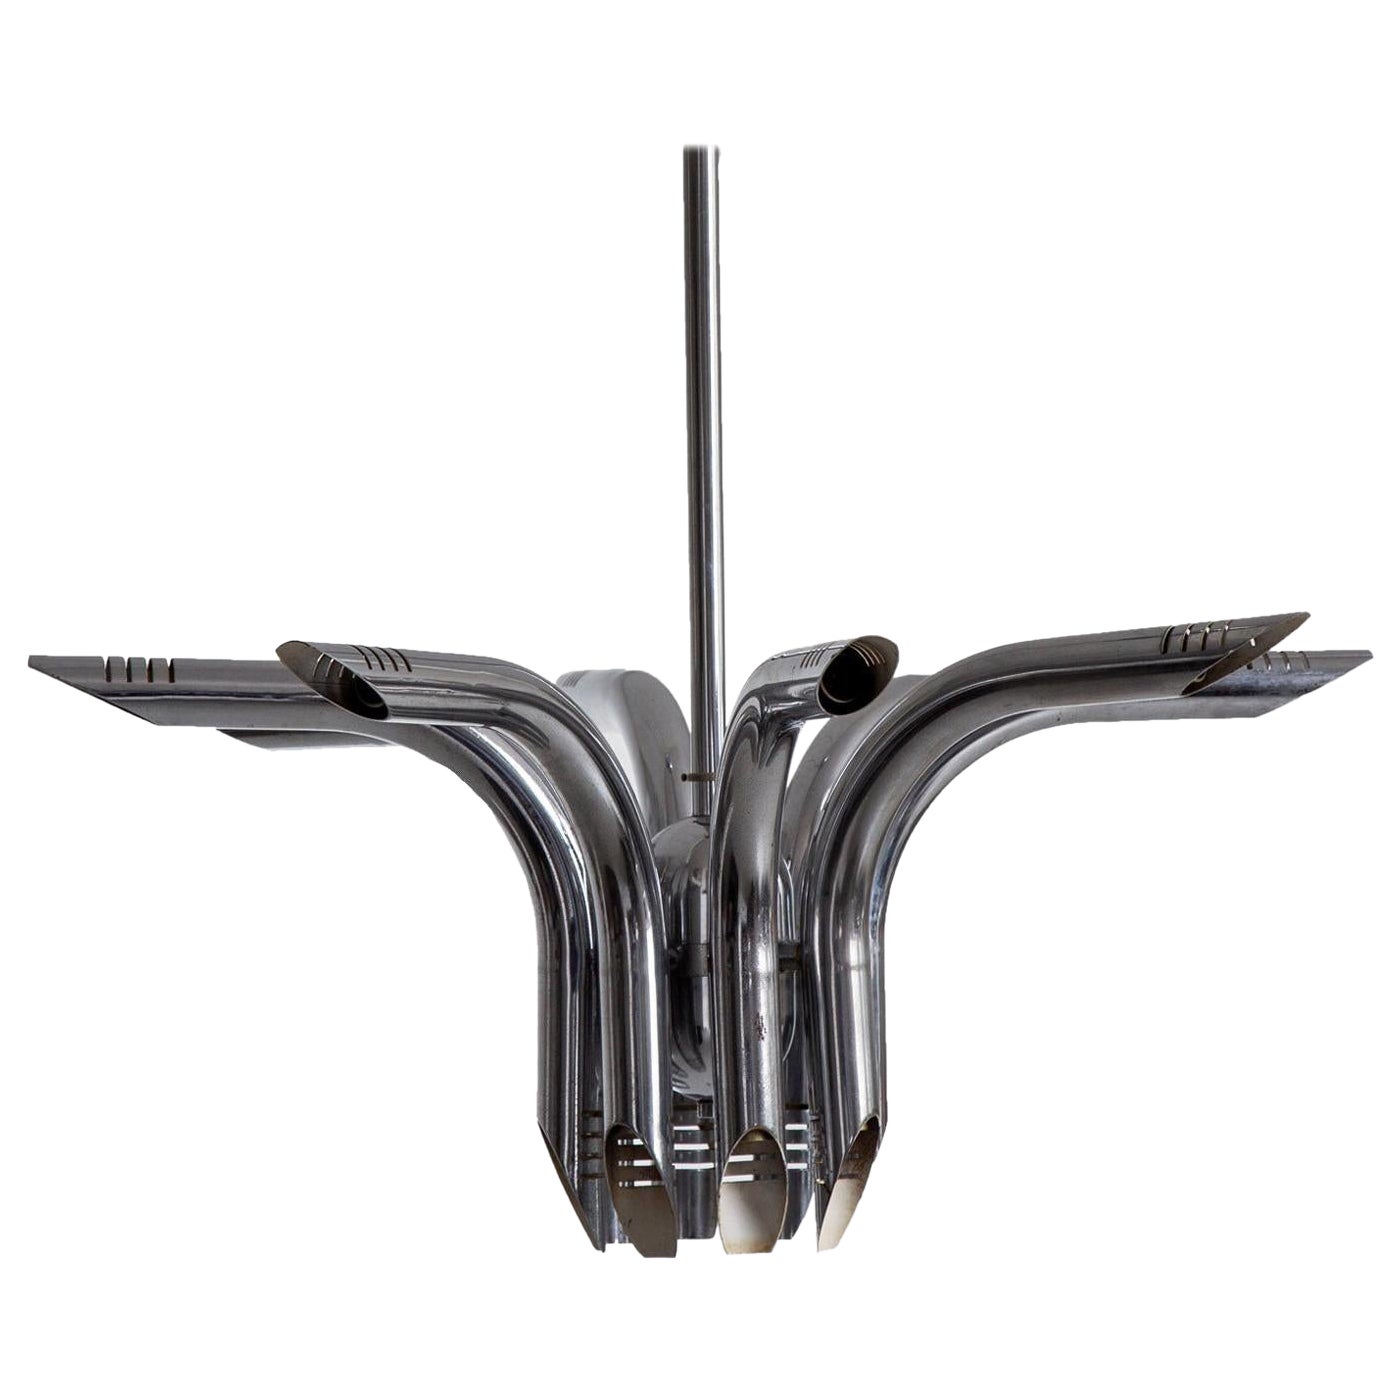 Vintage Chromed Steel Pipes Pendant Chandelier, Contemporary Industrial Style